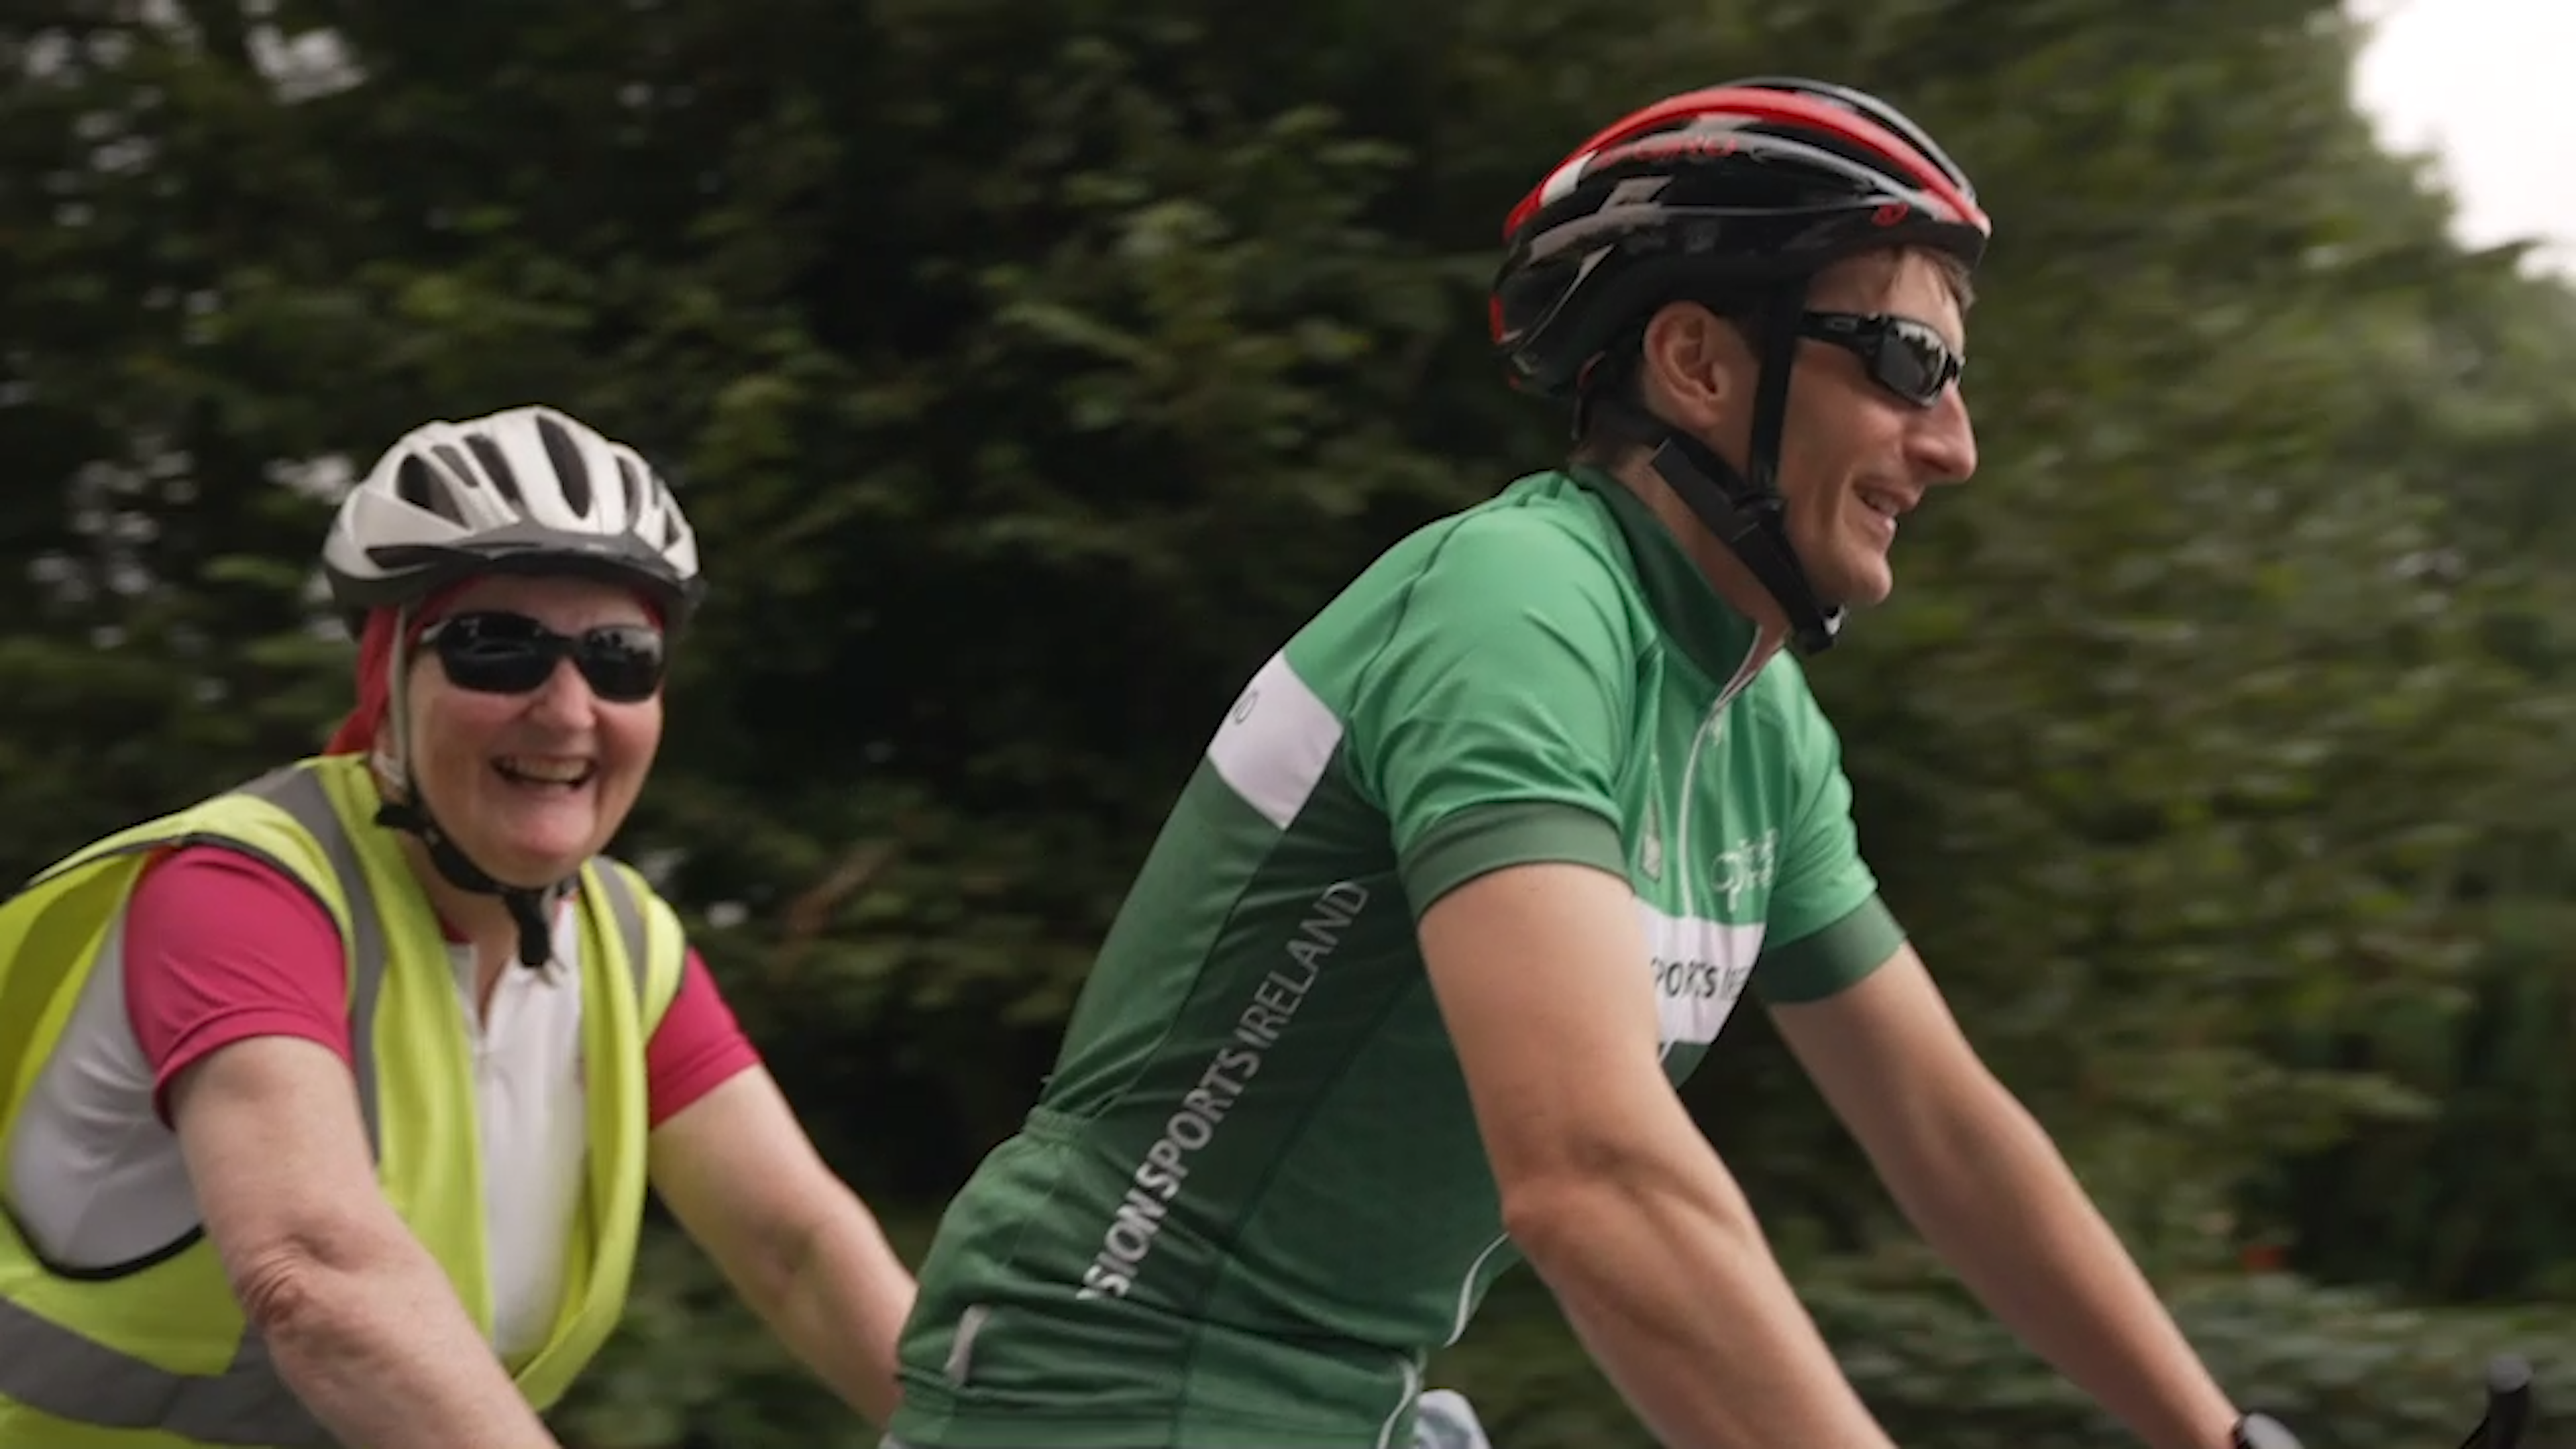 A woman and a woman, both of whom are wearing high visibility vests and sunglasses, smile as they are photographed while cycling